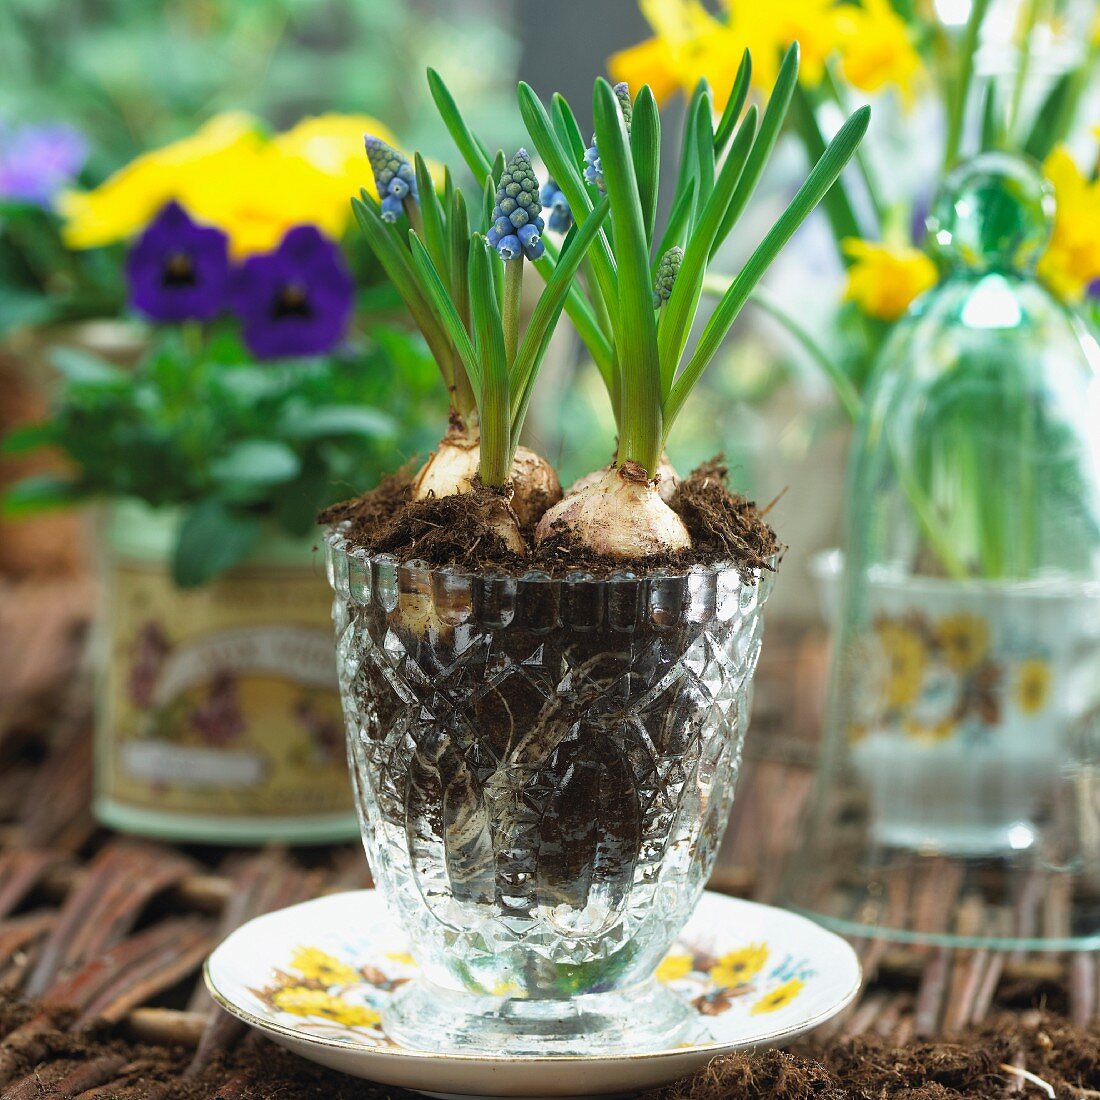 Grape hyacinths in a glass vase